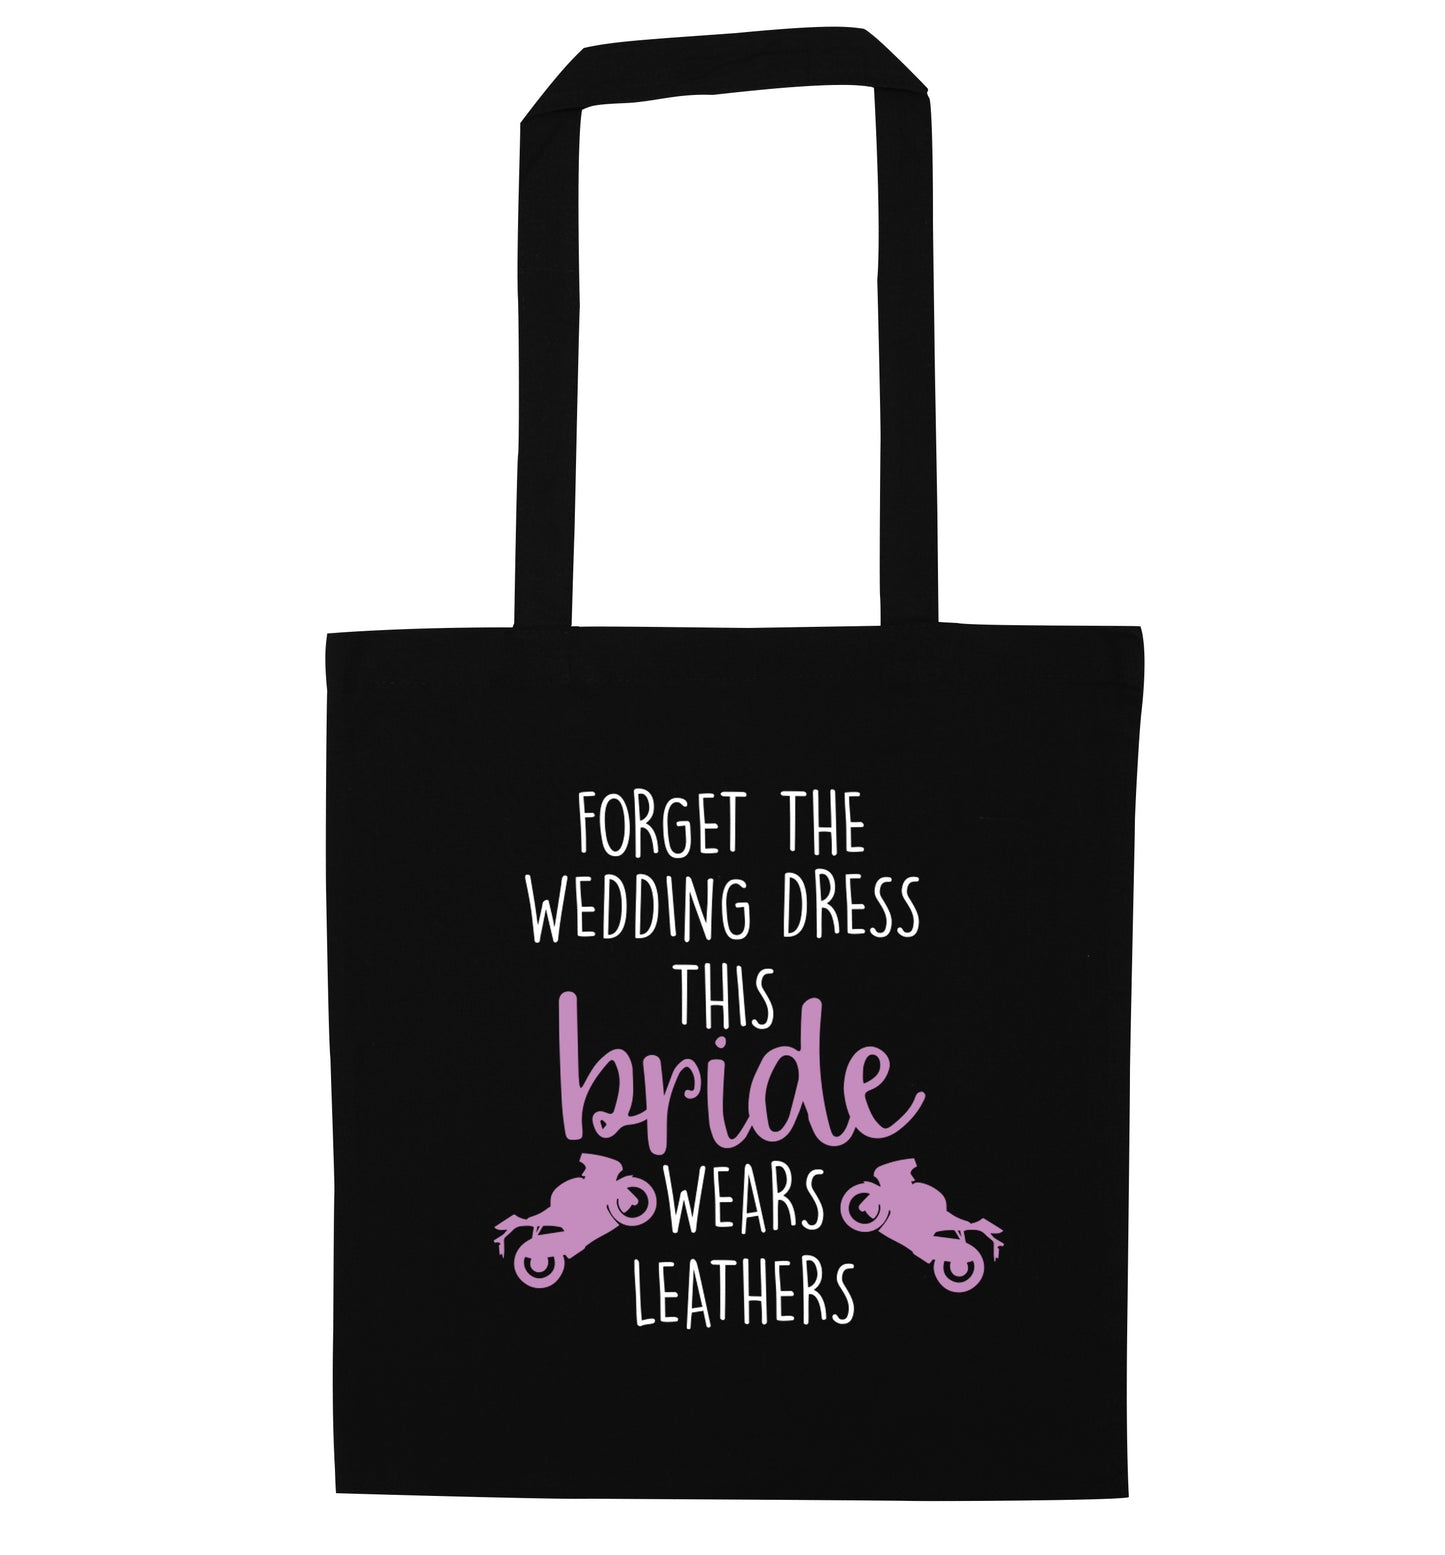 Forget the wedding dress this bride wears leathers black tote bag